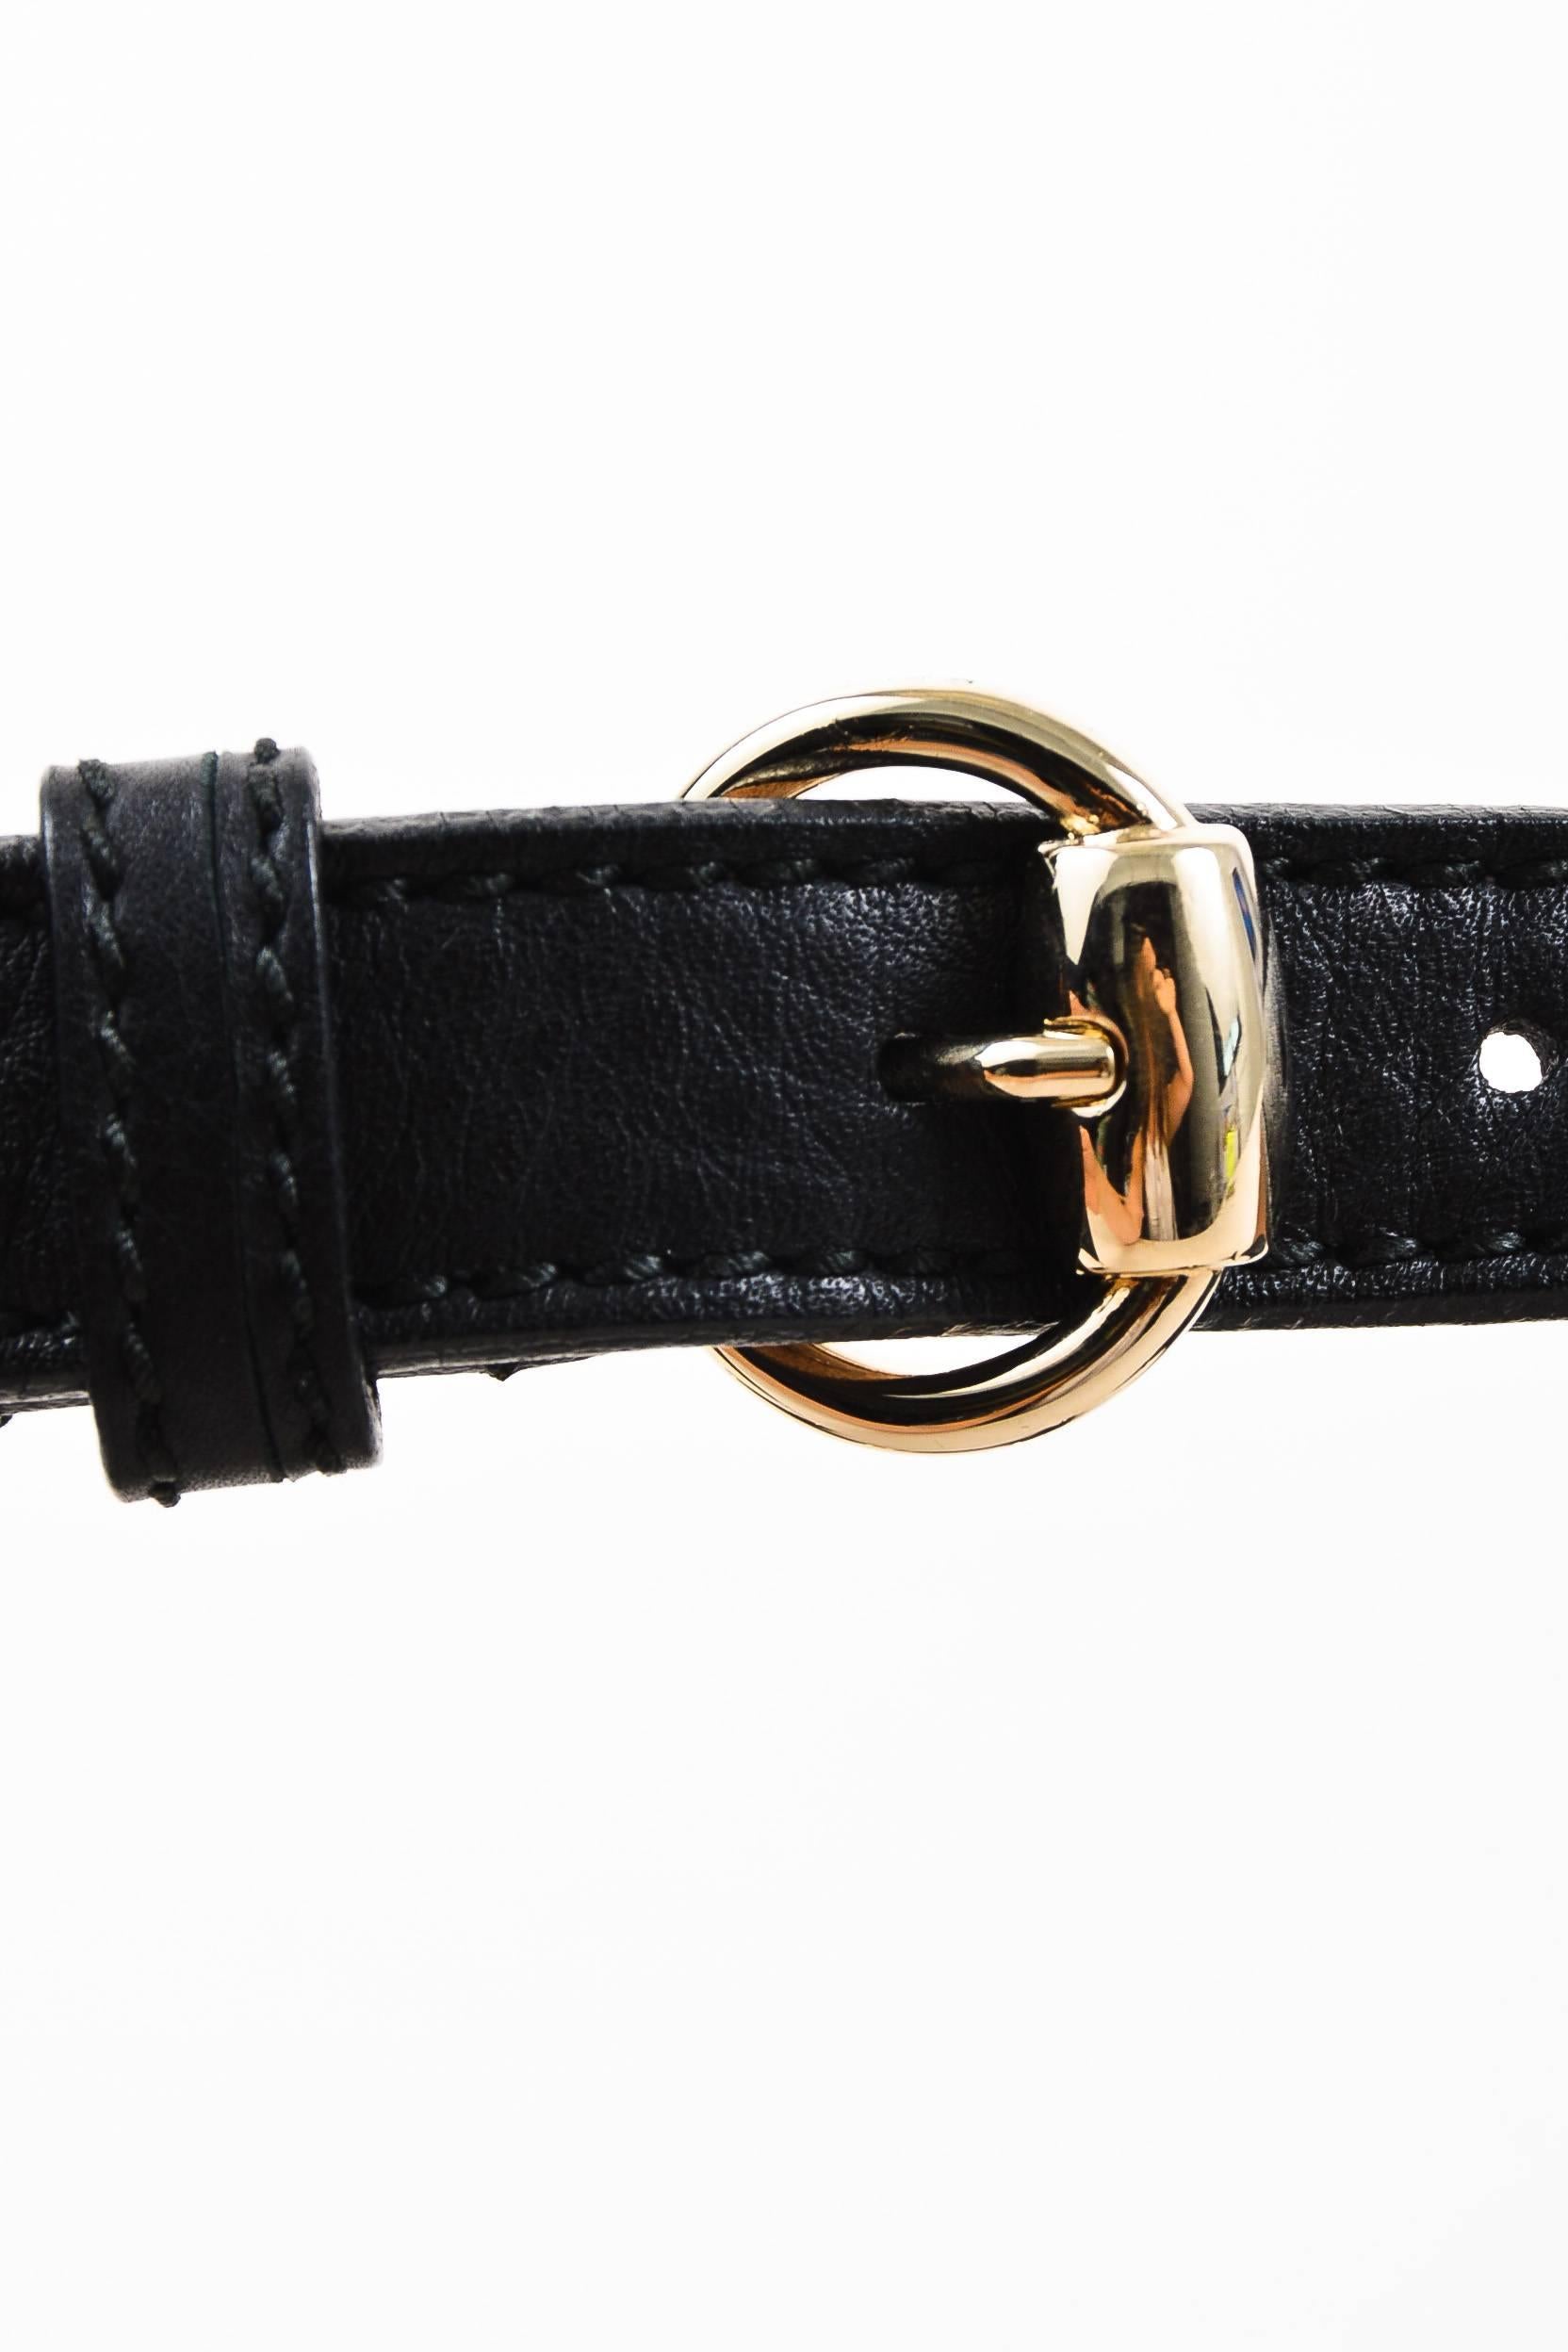 Gucci Black Gold Tone Leather Horsebit Belt SZ 65 In Excellent Condition For Sale In Chicago, IL